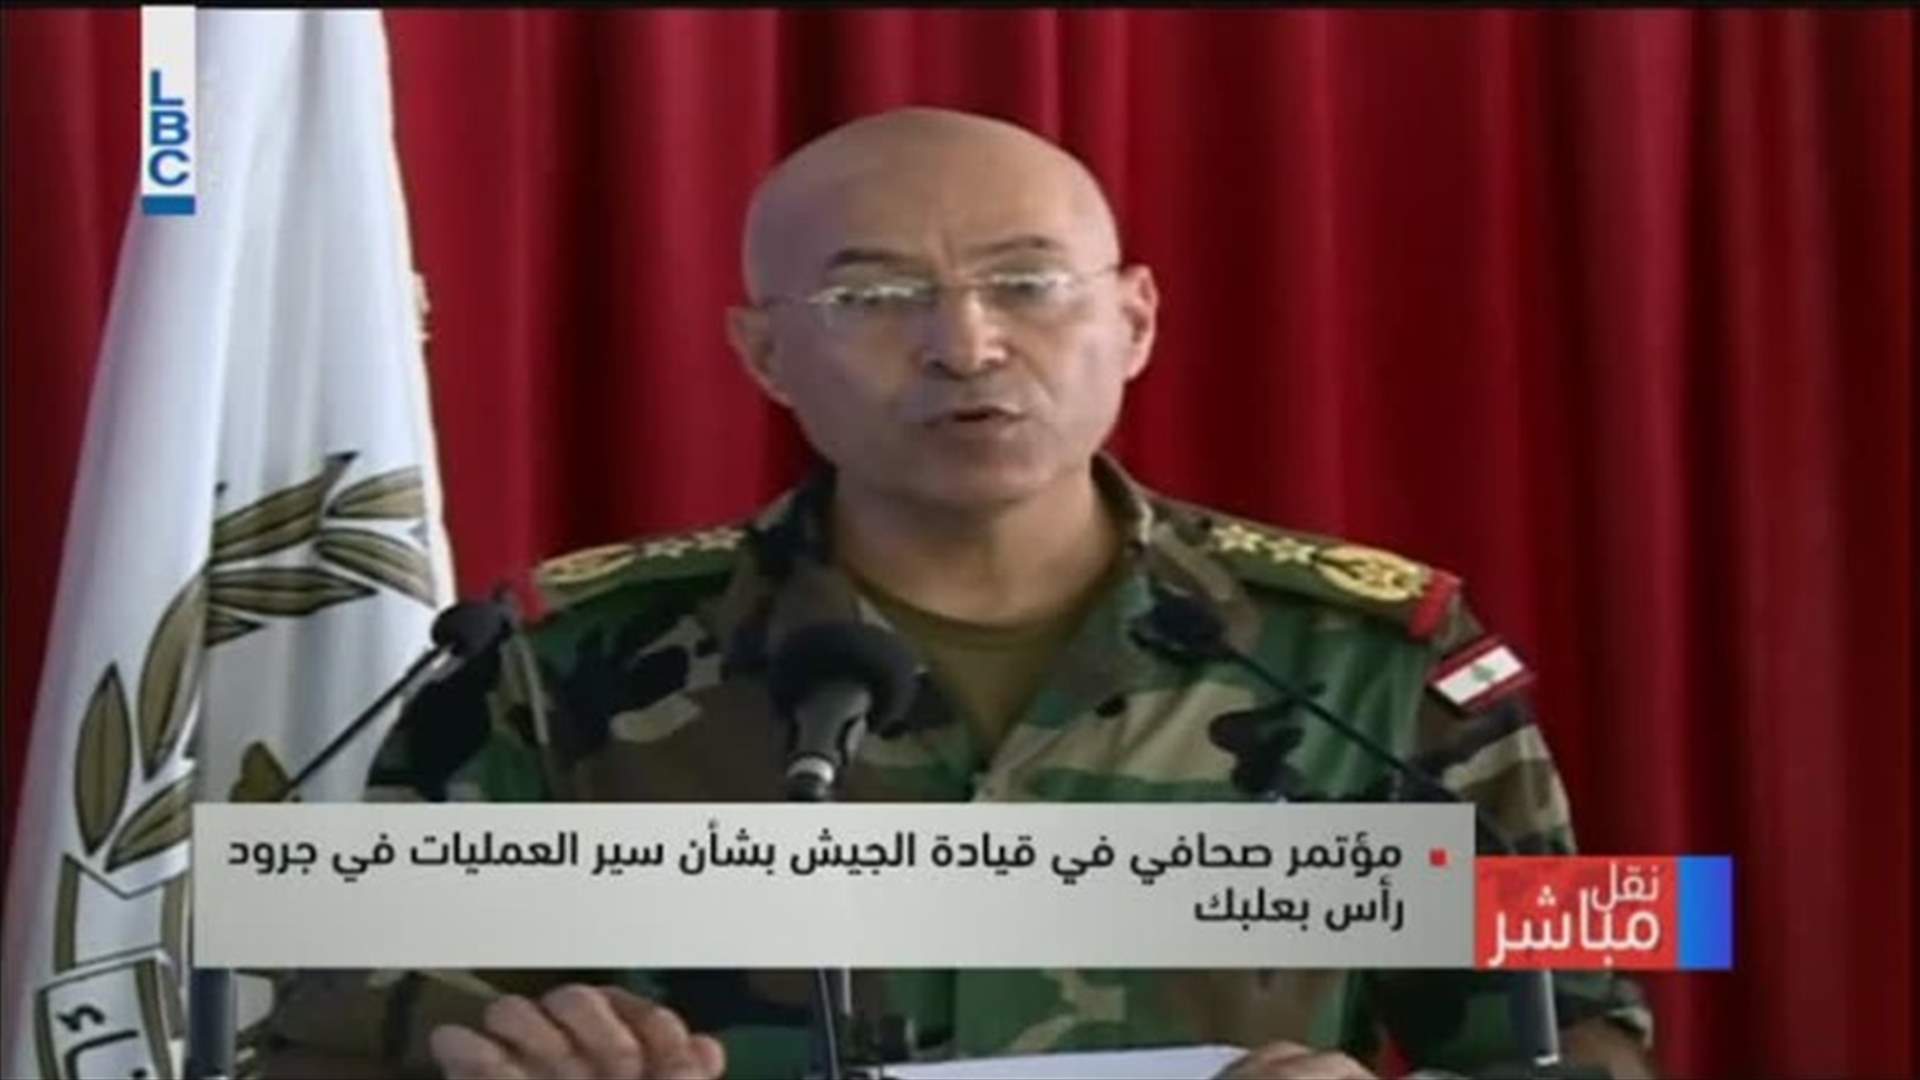 REPORT: Lebanese army holds conference on its offensive against ISIS